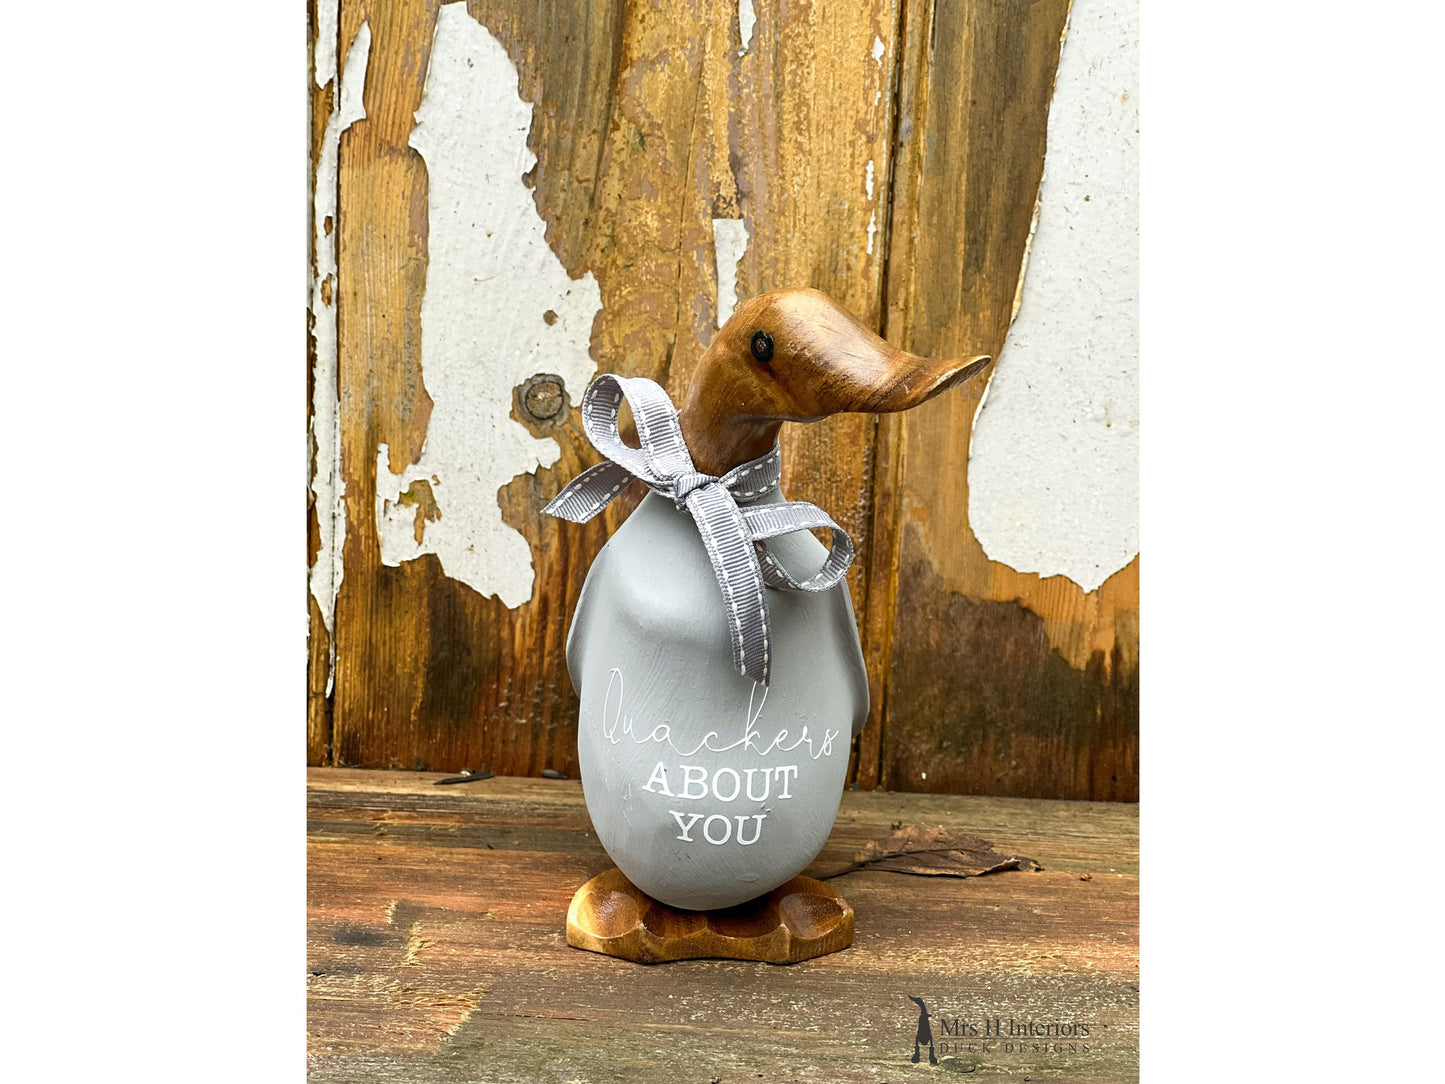 Quackers About You - Decorated Wooden Duck in Boots by Mrs H the Duck Lady